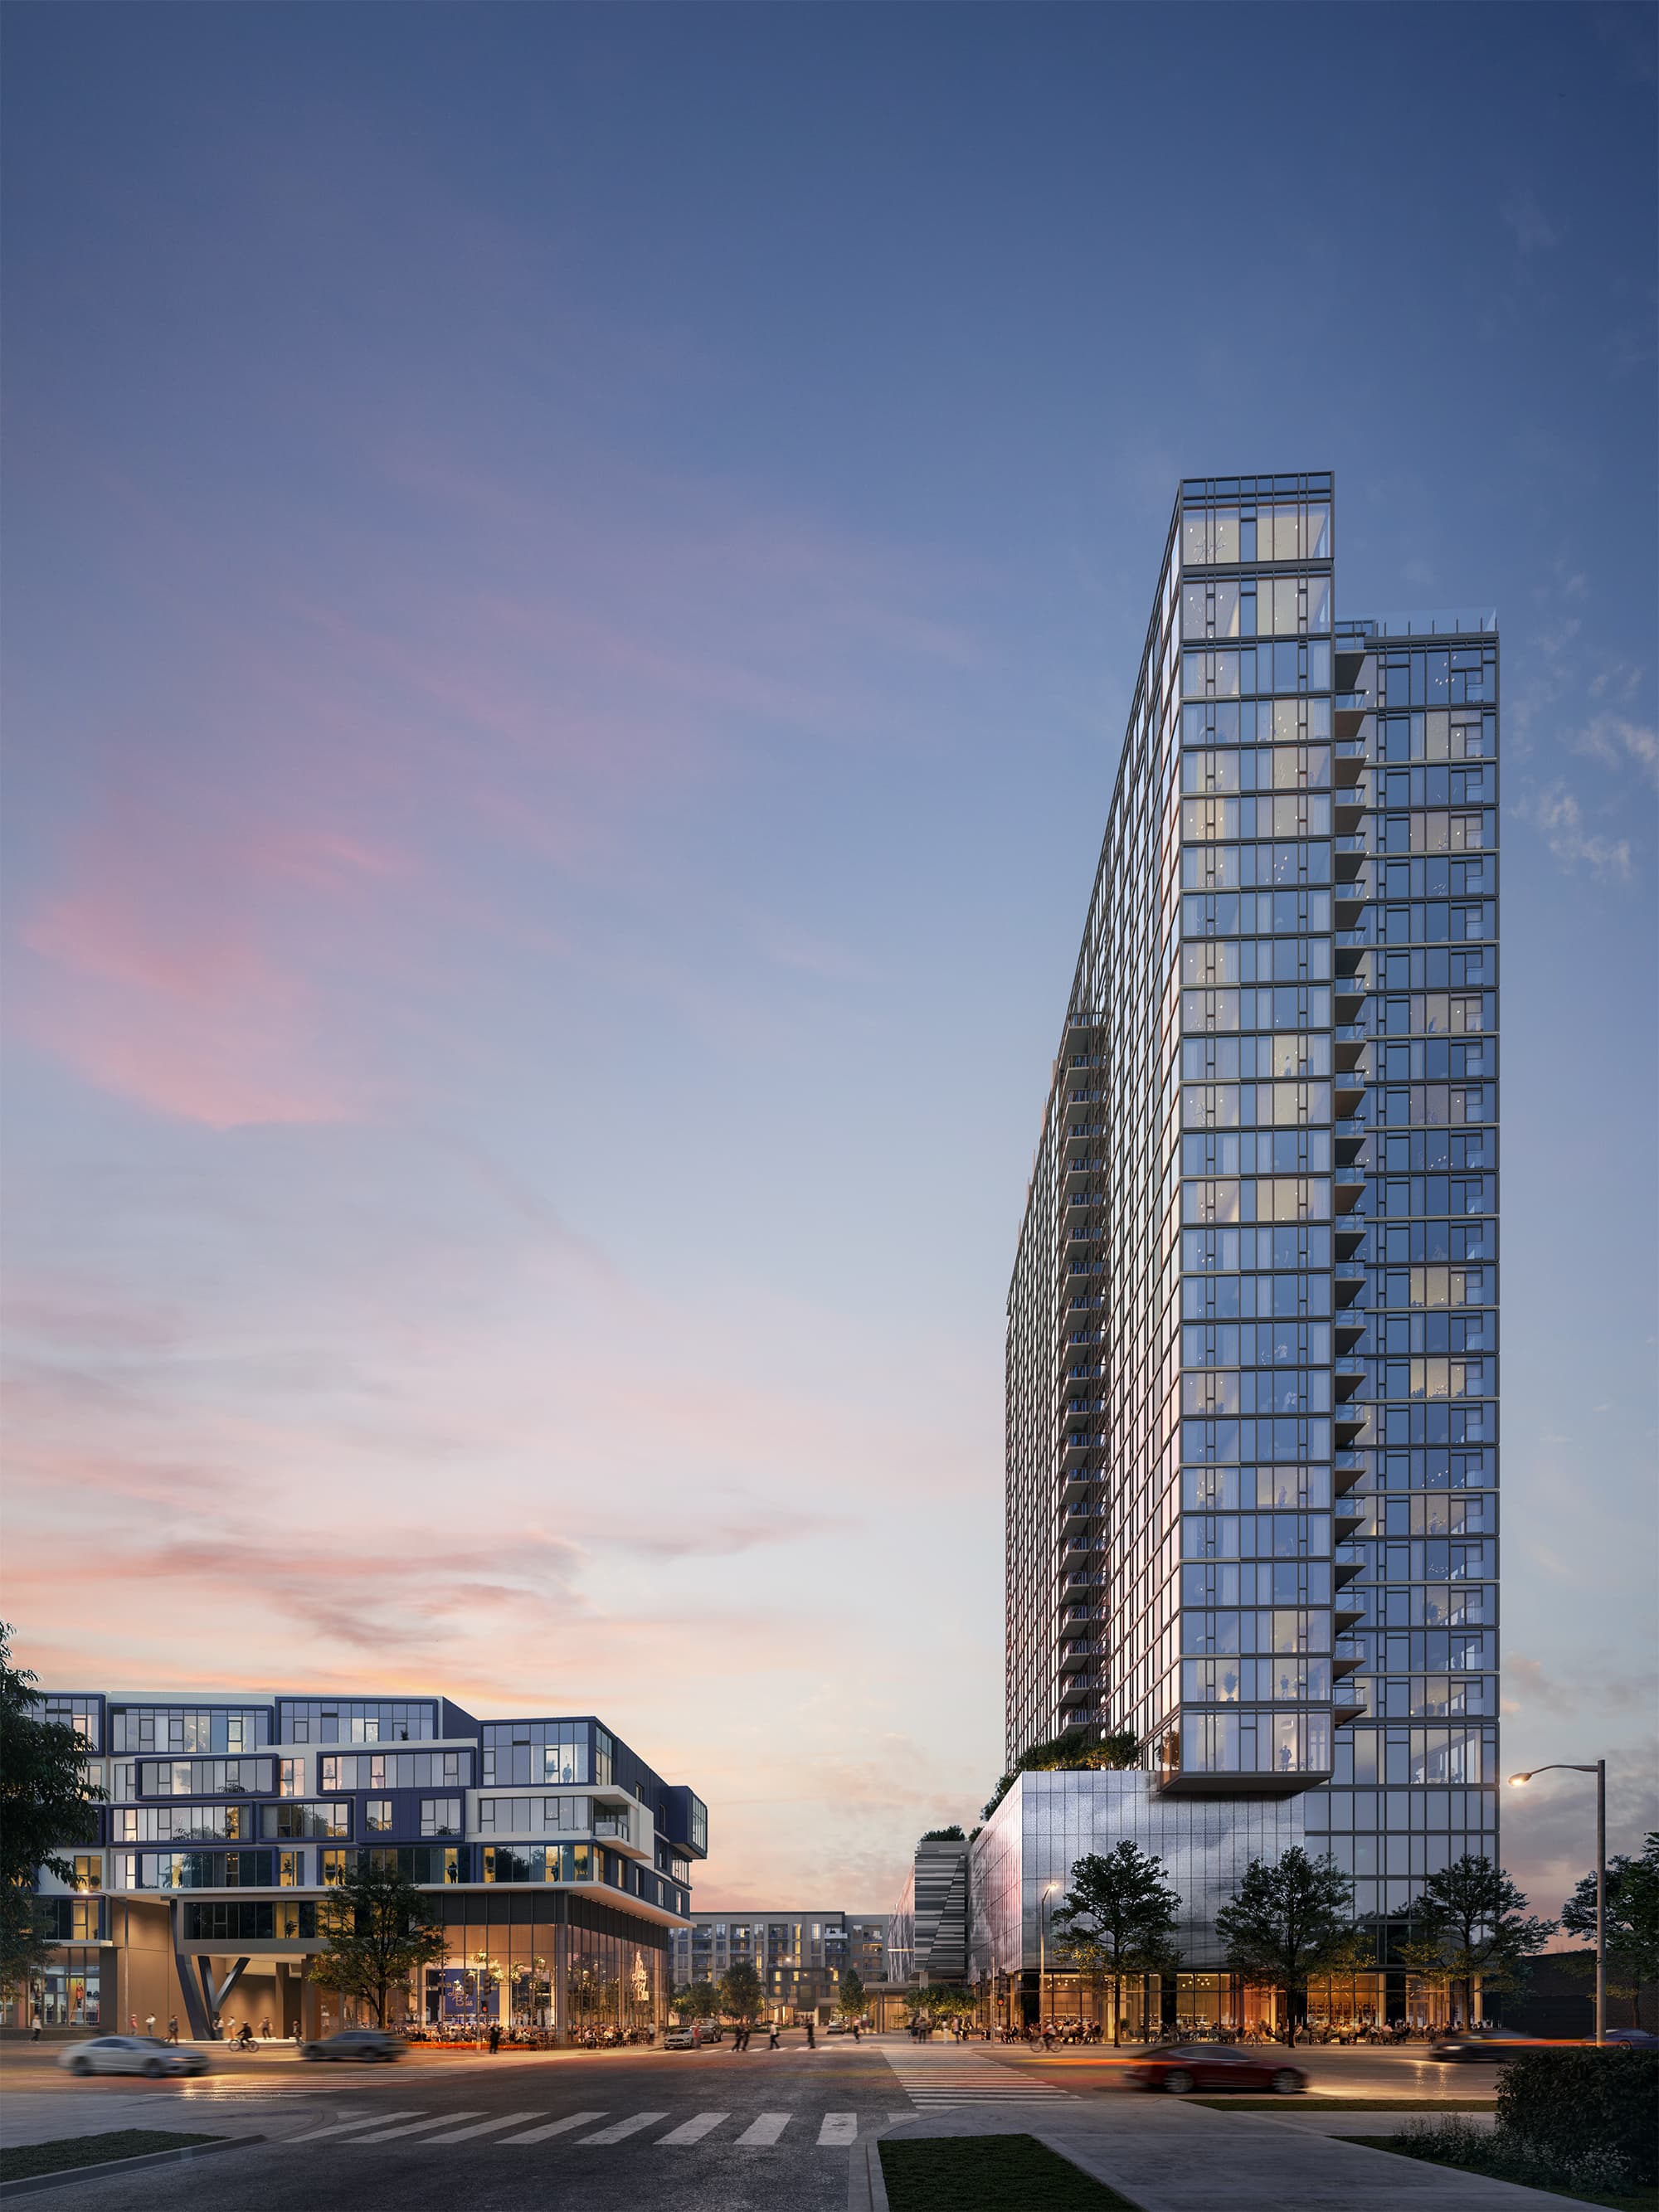 Exterior shot of new cumulus high-rise apartment building and commercial development